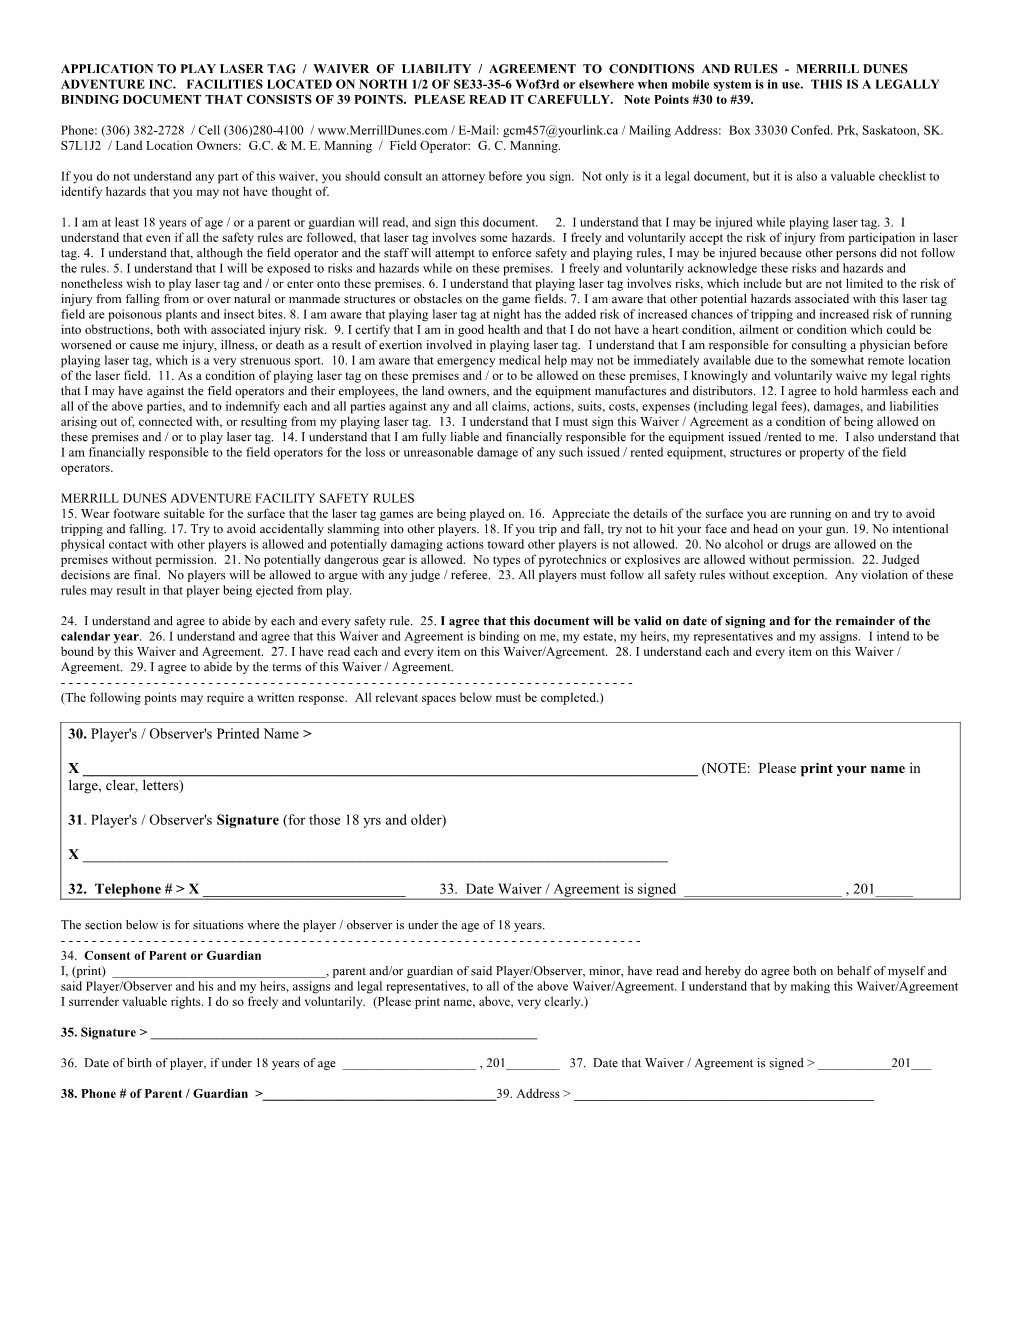 Application to Play Or Observe Paintball/Waiver of Liability/Agreement to Conditions And